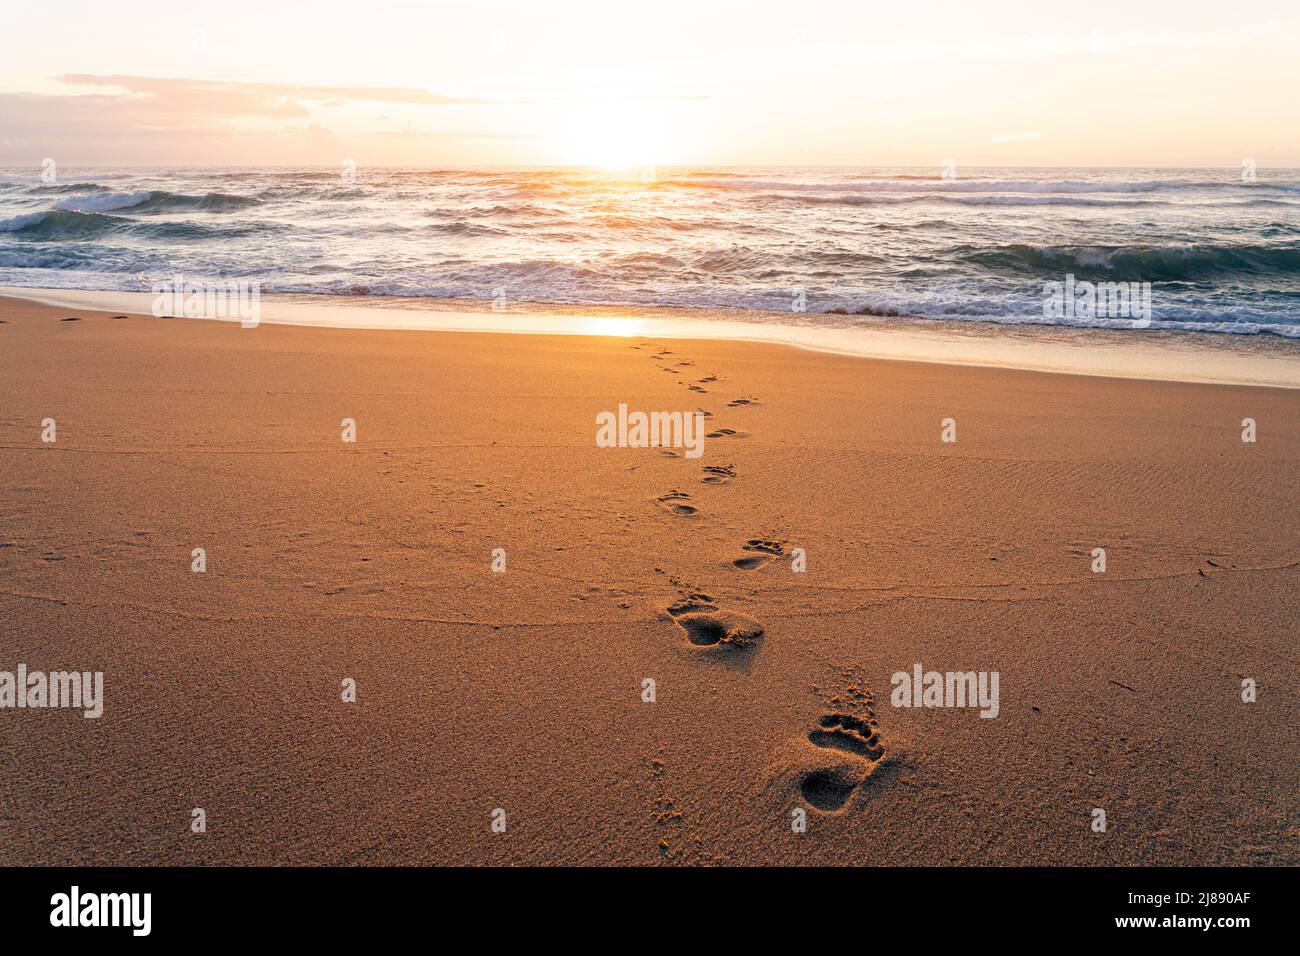 Footprints on the sand of a beach at sunset Stock Photo